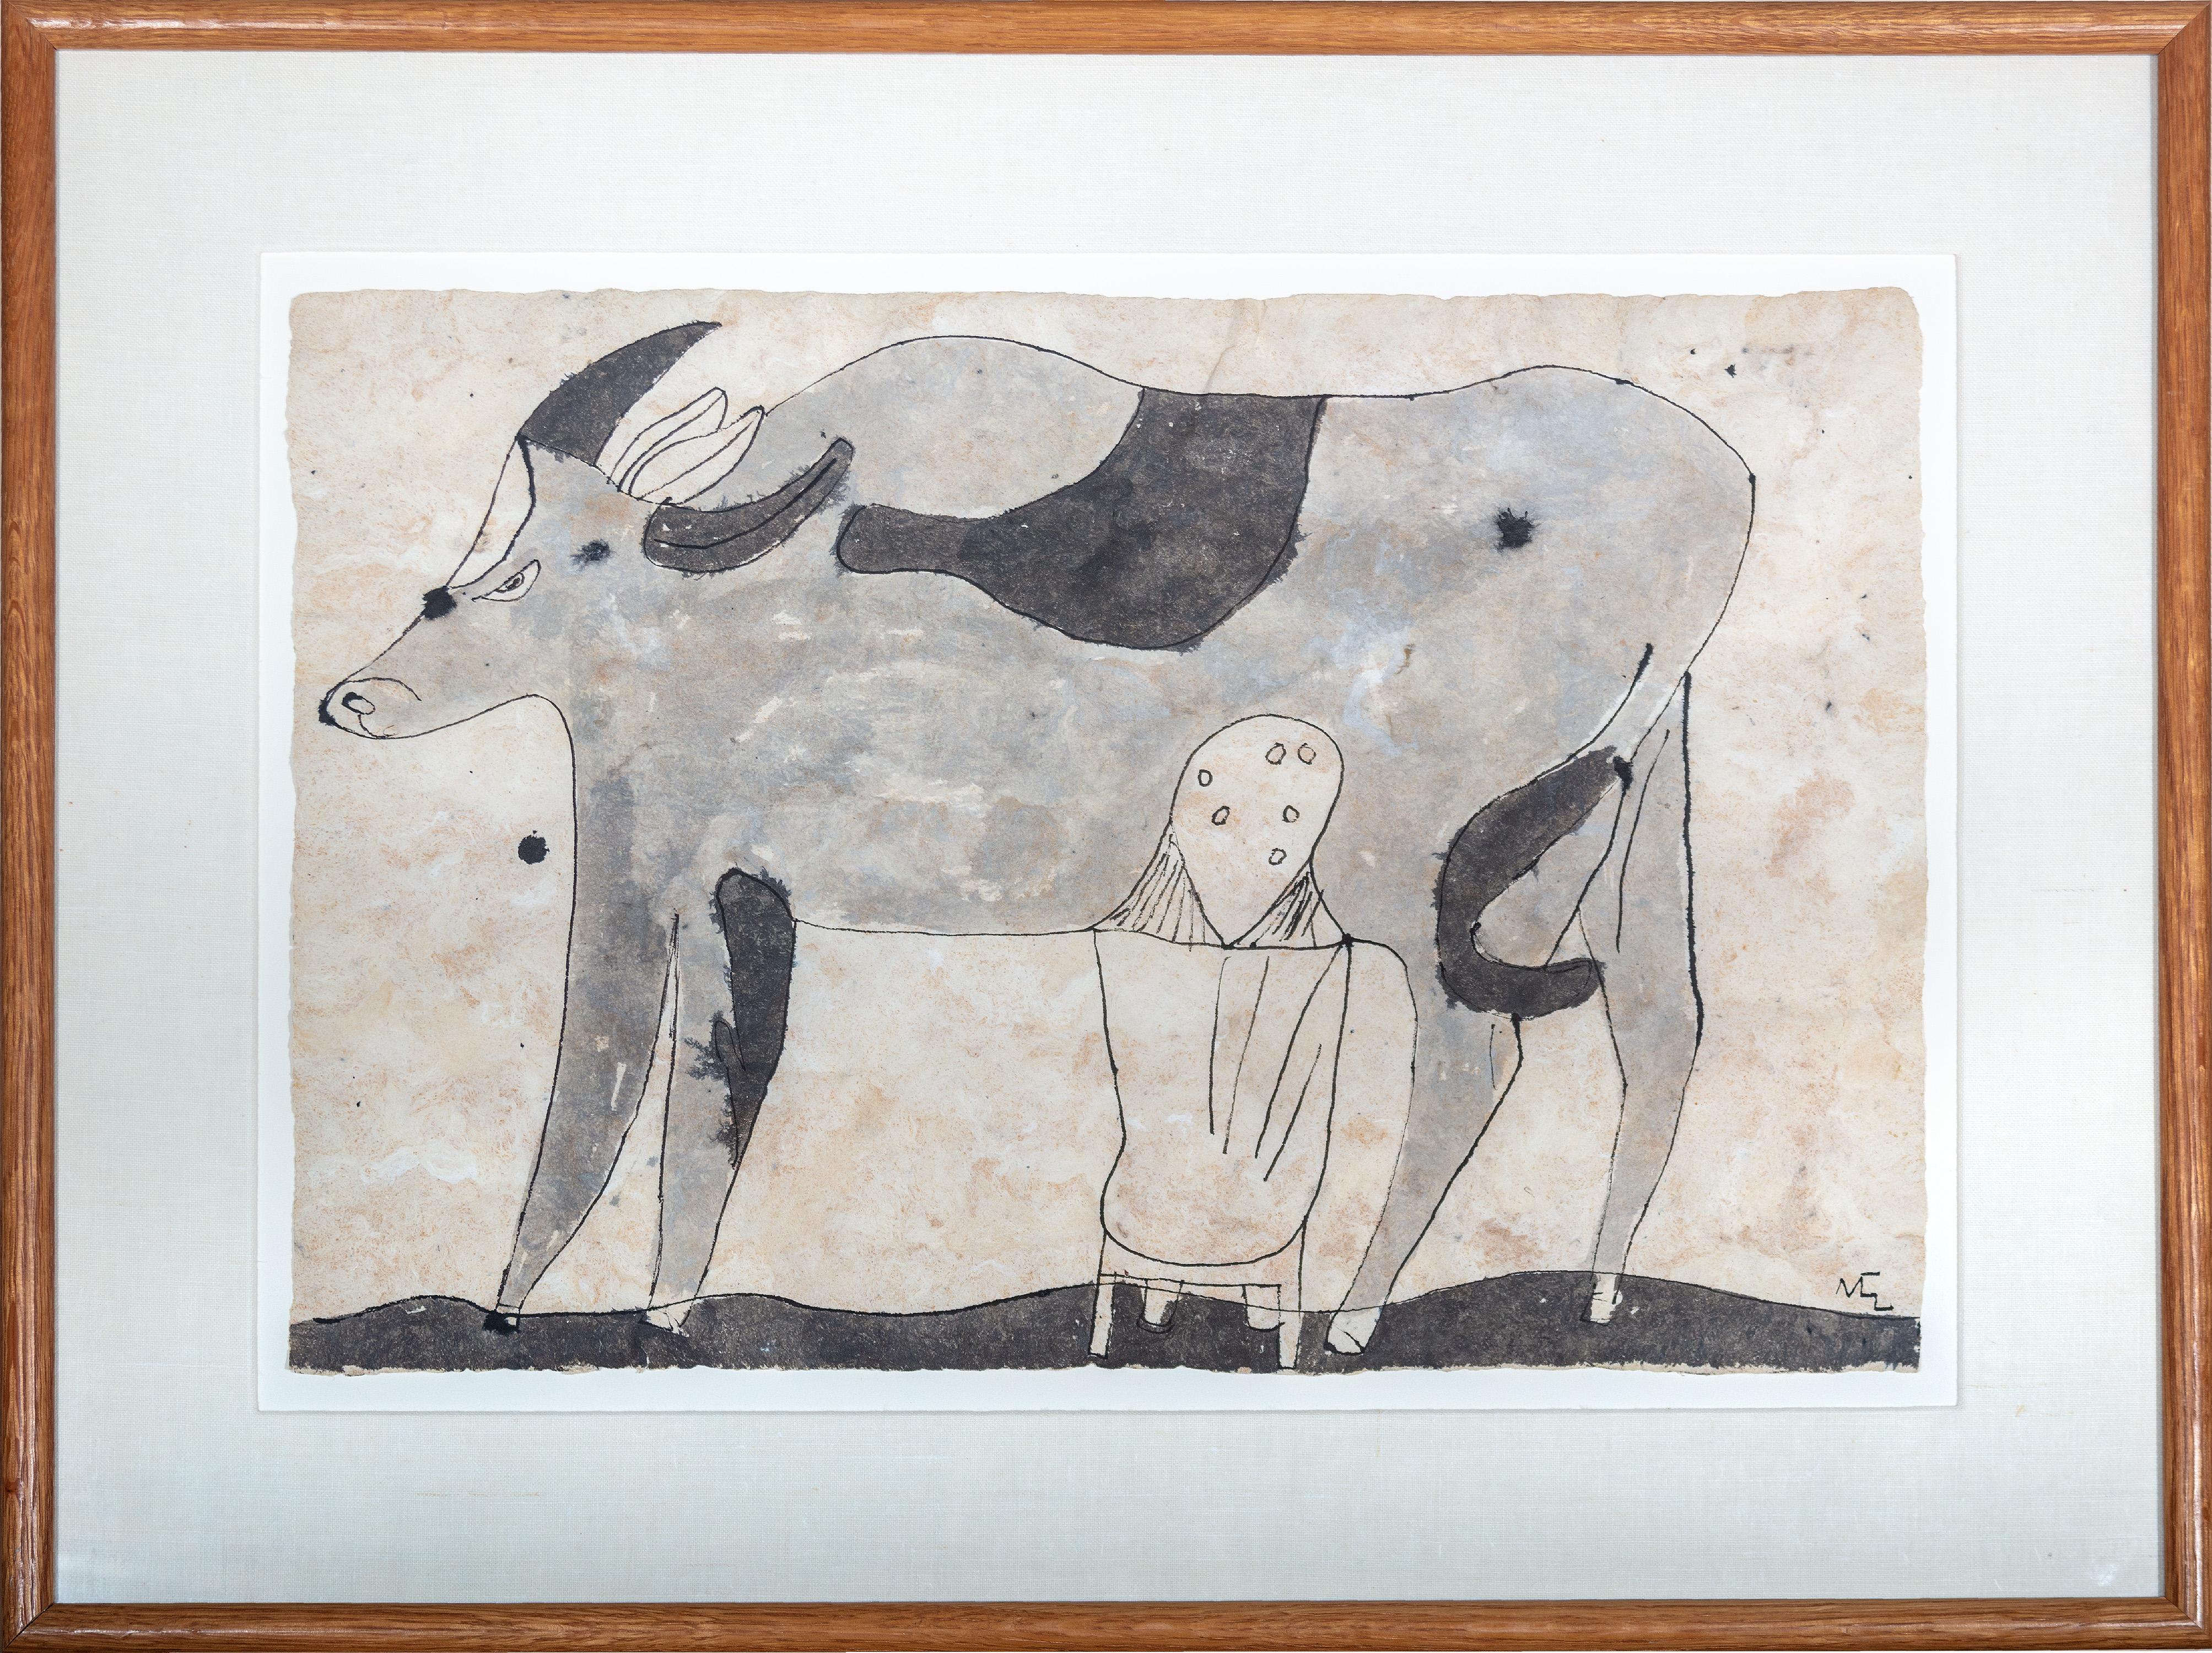 "Woman Milking a Cow" Ink on Handmade Amate Paper signed by Miguel Castro Leñero